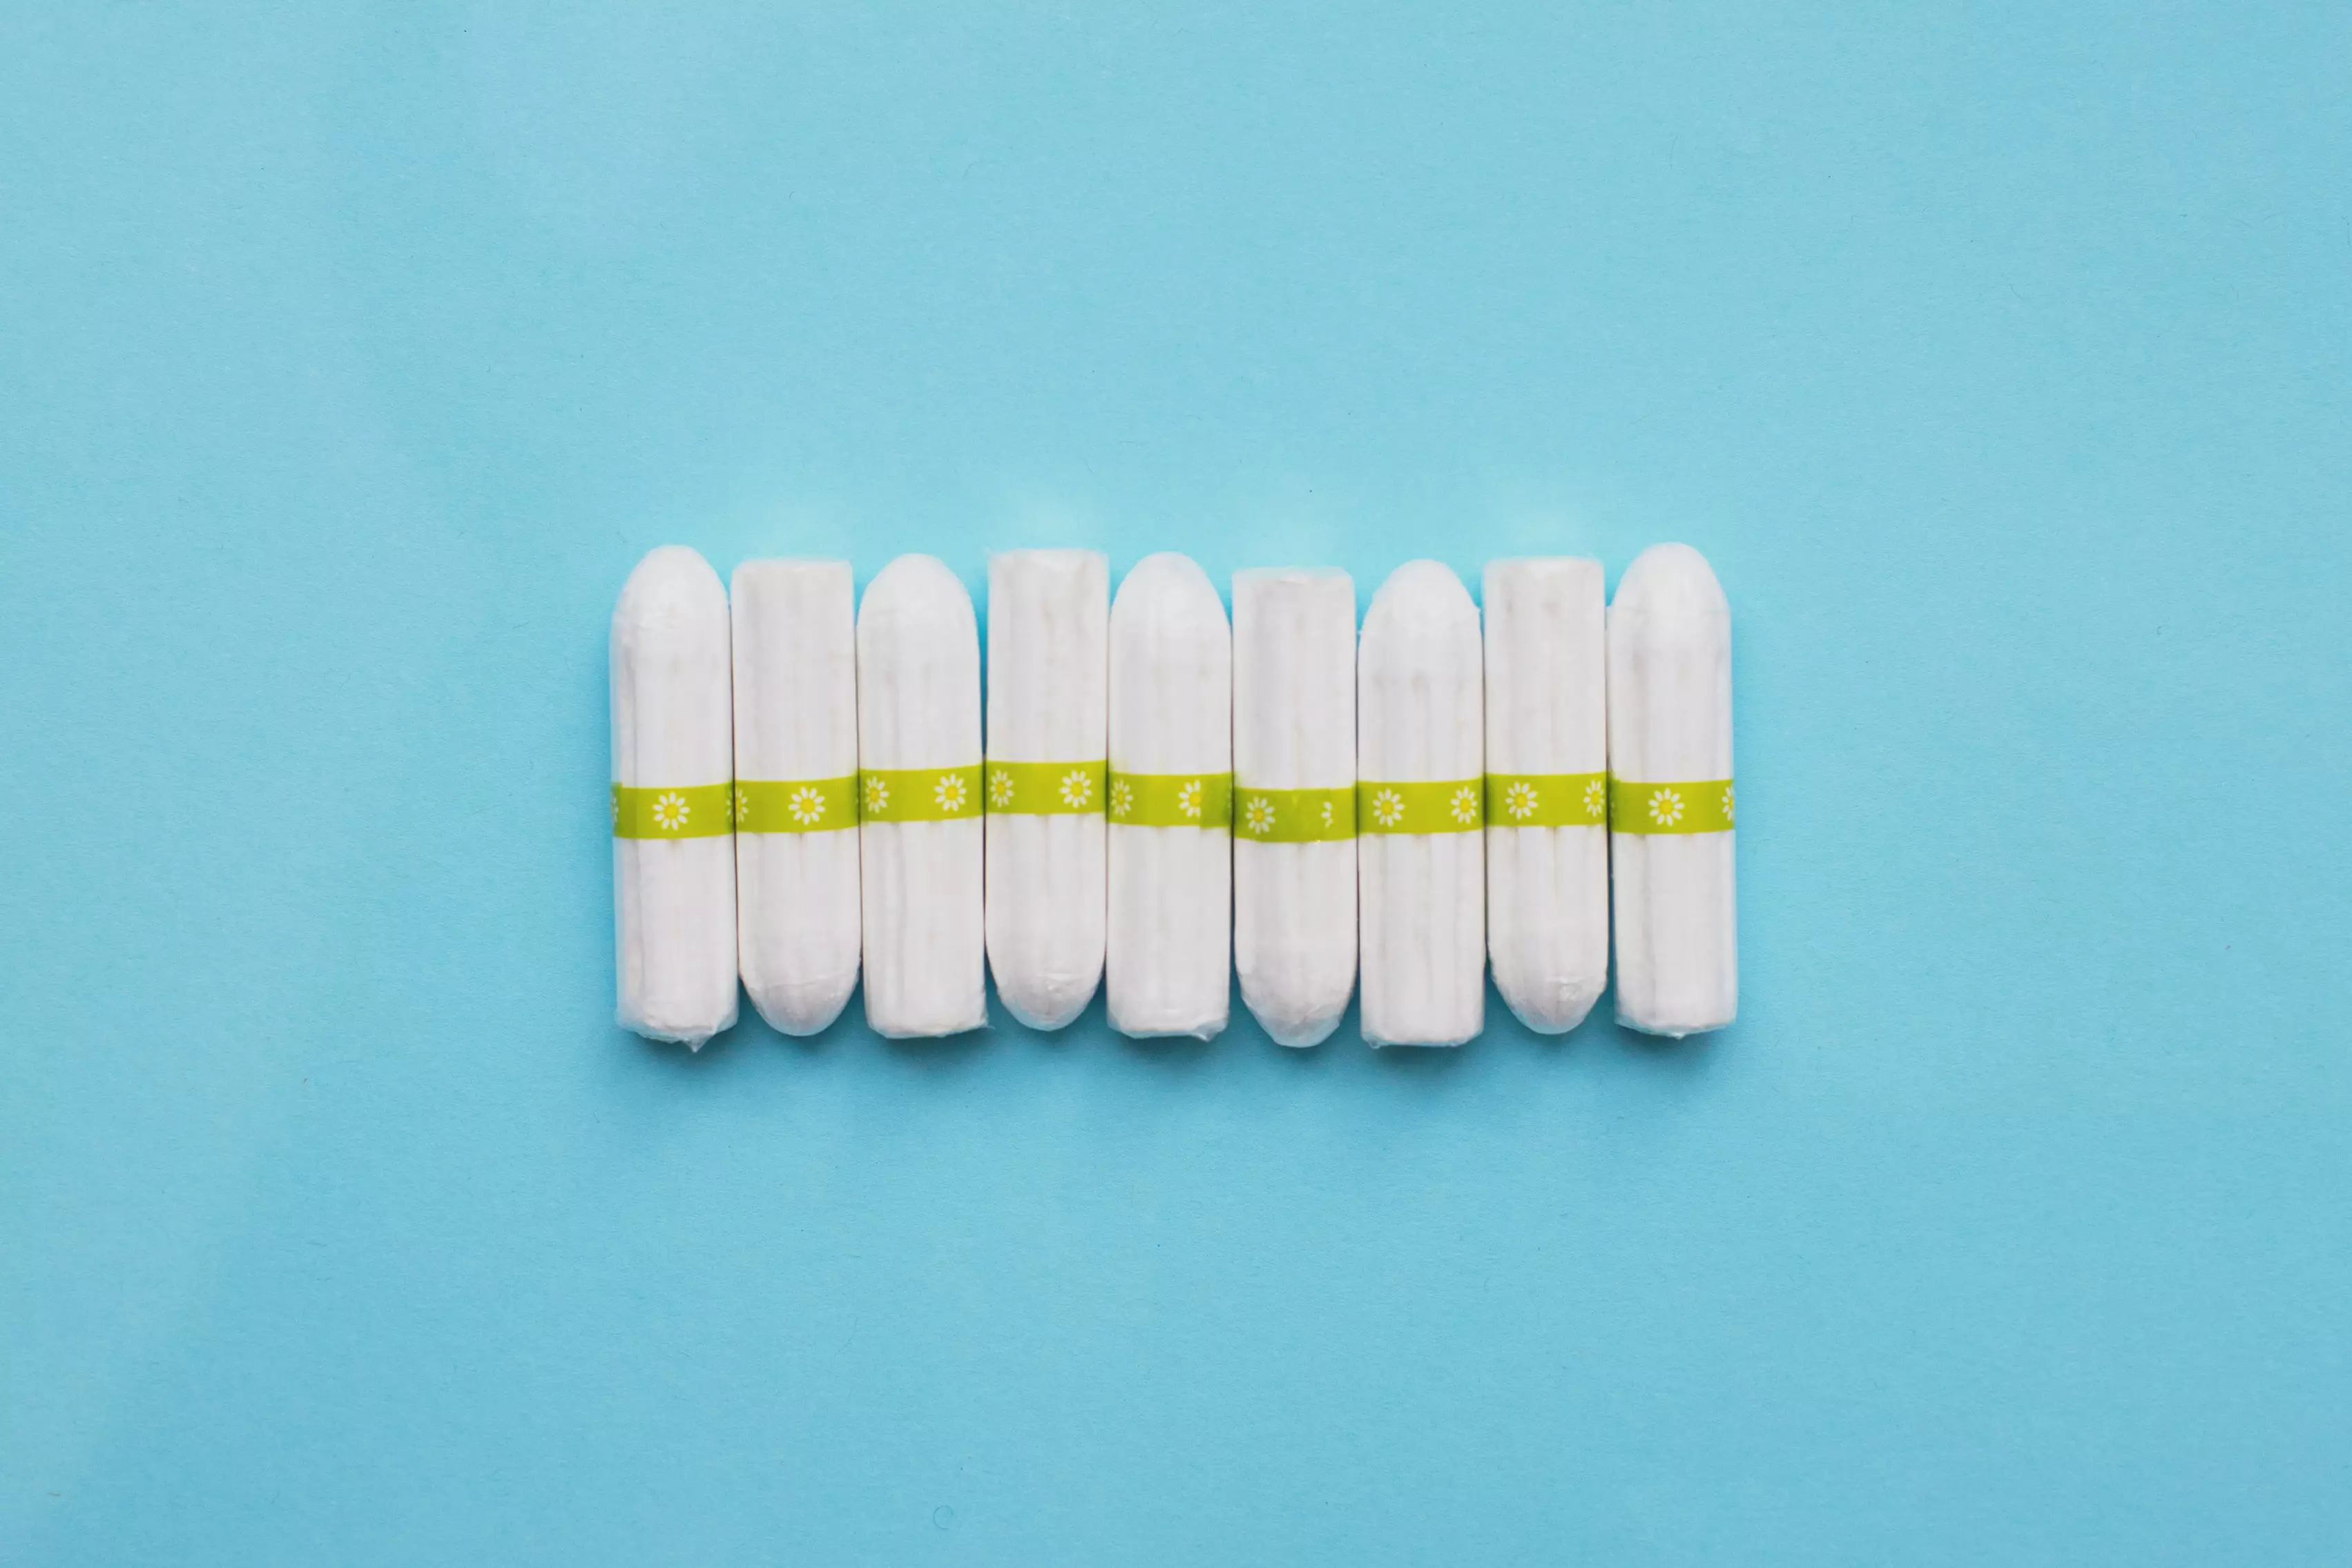 In November last year, Scotland became the first country to make period products free for all (